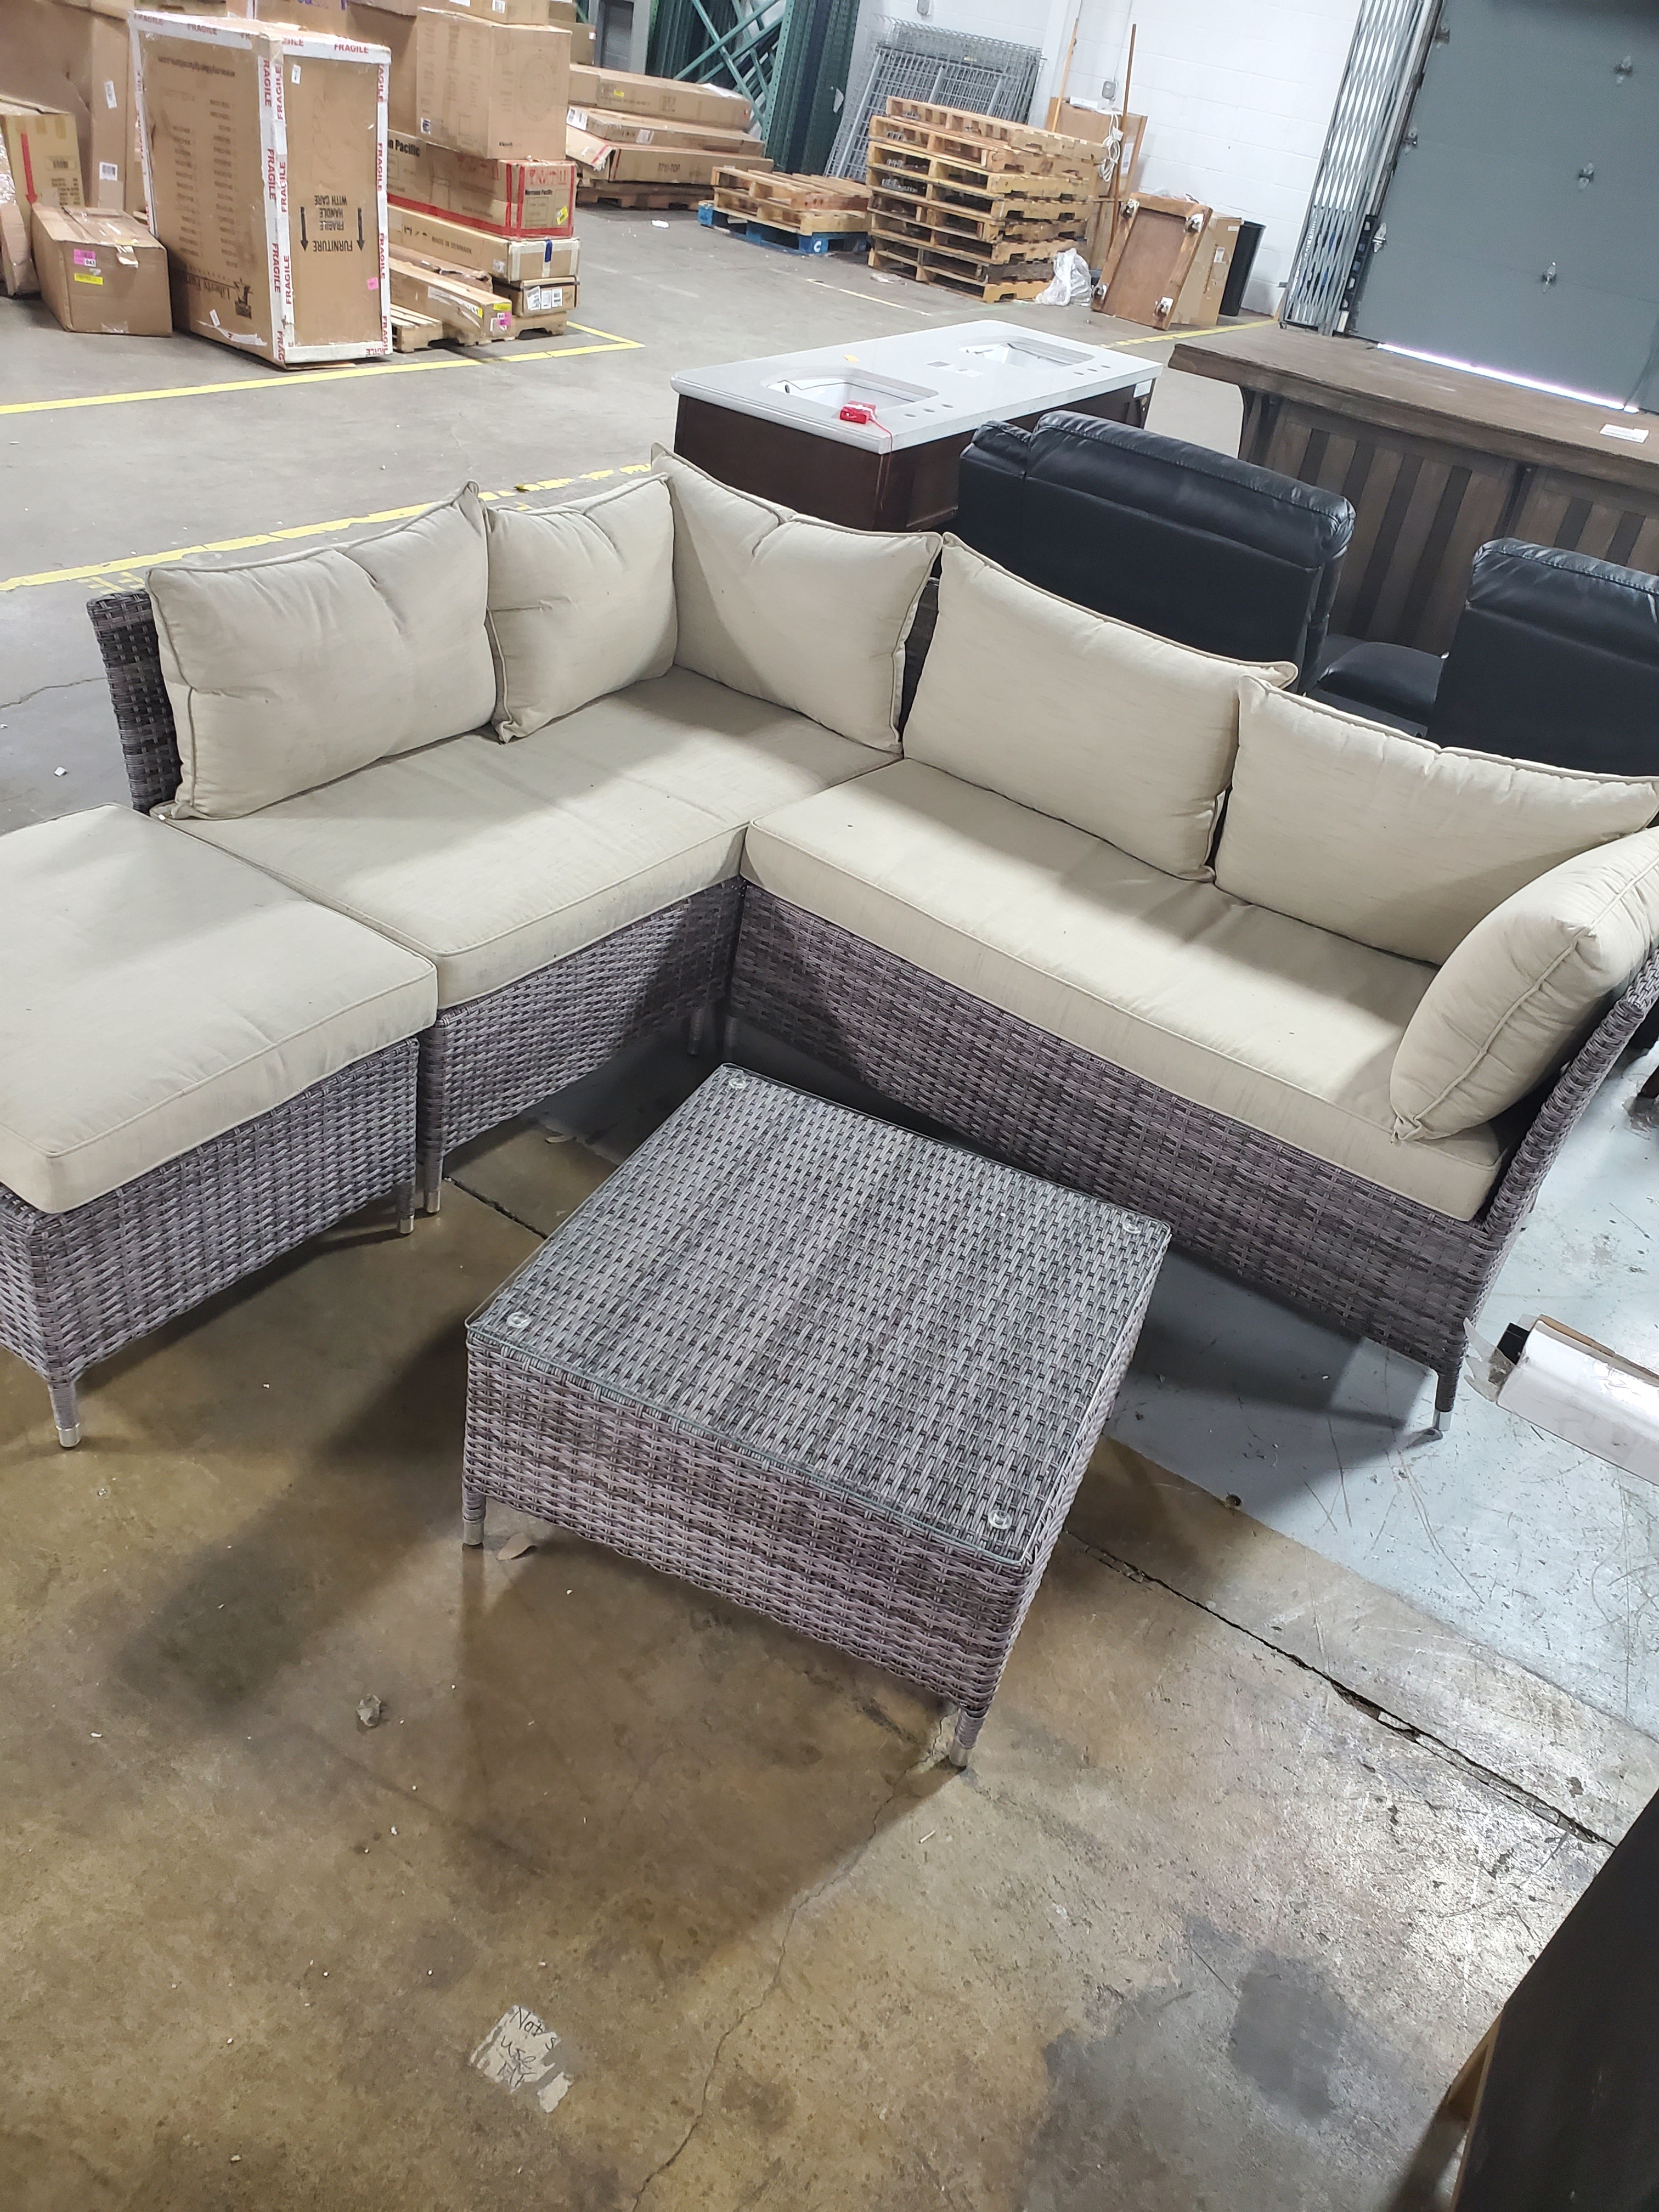 Ellenburg 4 Piece Rattan Sectional Seating Group with Cushions